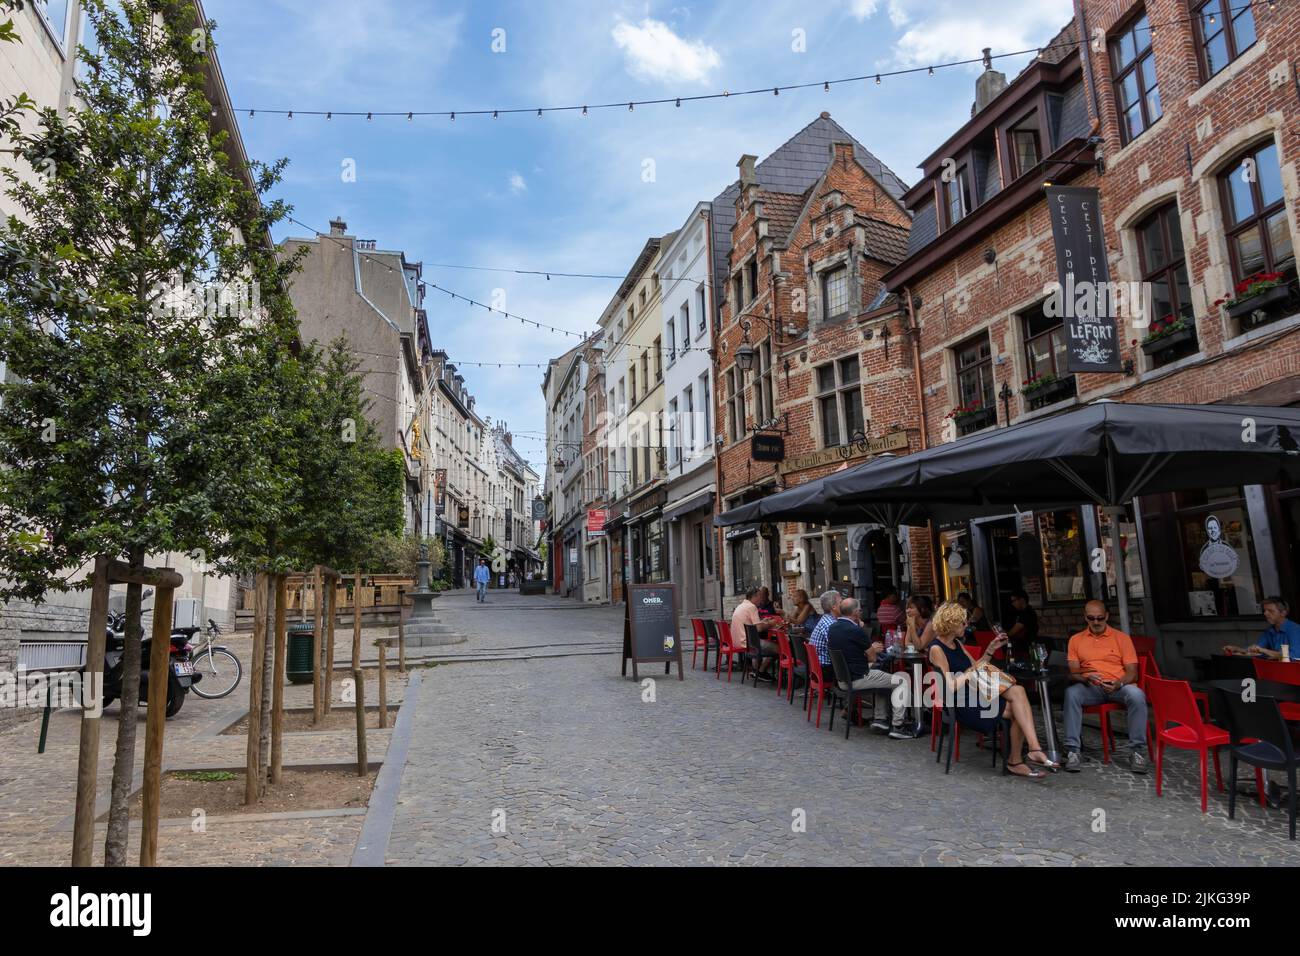 Brussels, Belgium - July 16, 2018: Rue de Rollebeek, a small street with cafes and restaurants in the downtown Stock Photo